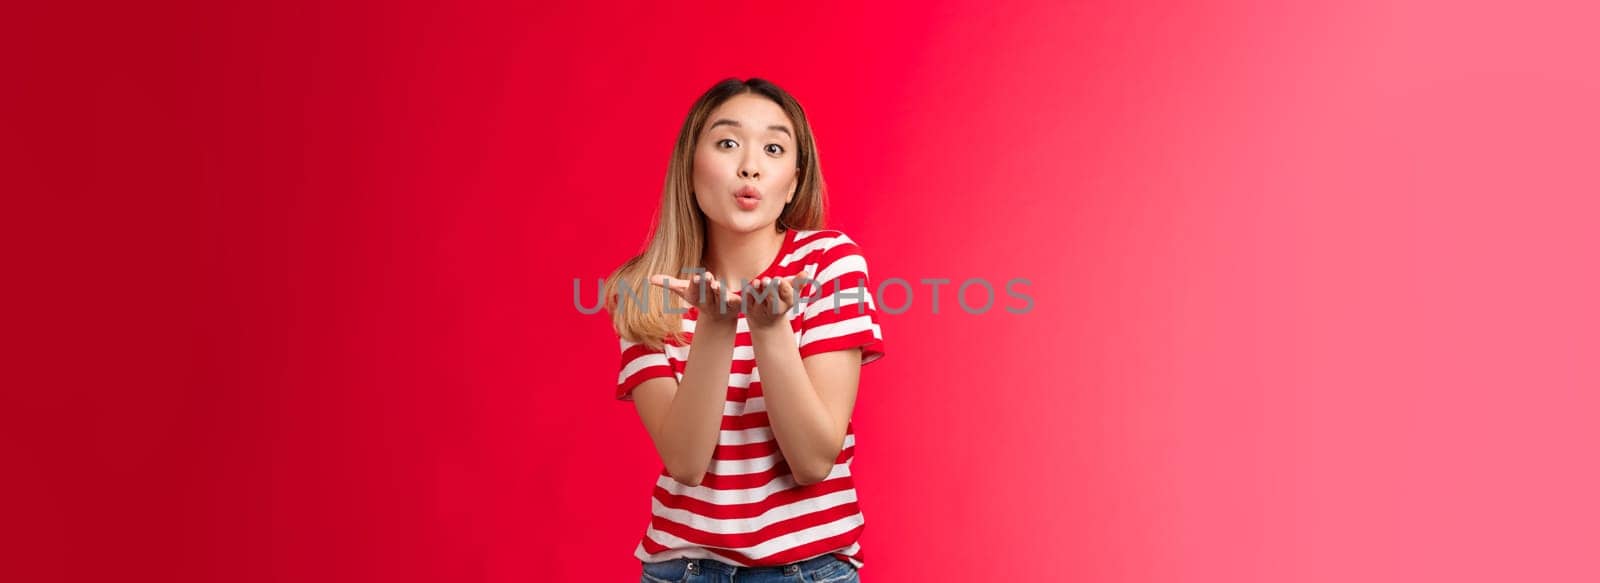 Silly glamour tender asian blond modern girl send you sweet kisses. Joyful urban woman wear striped t-shirt hold palms near fold lips blow kiss air mwah, stand red background glamour.